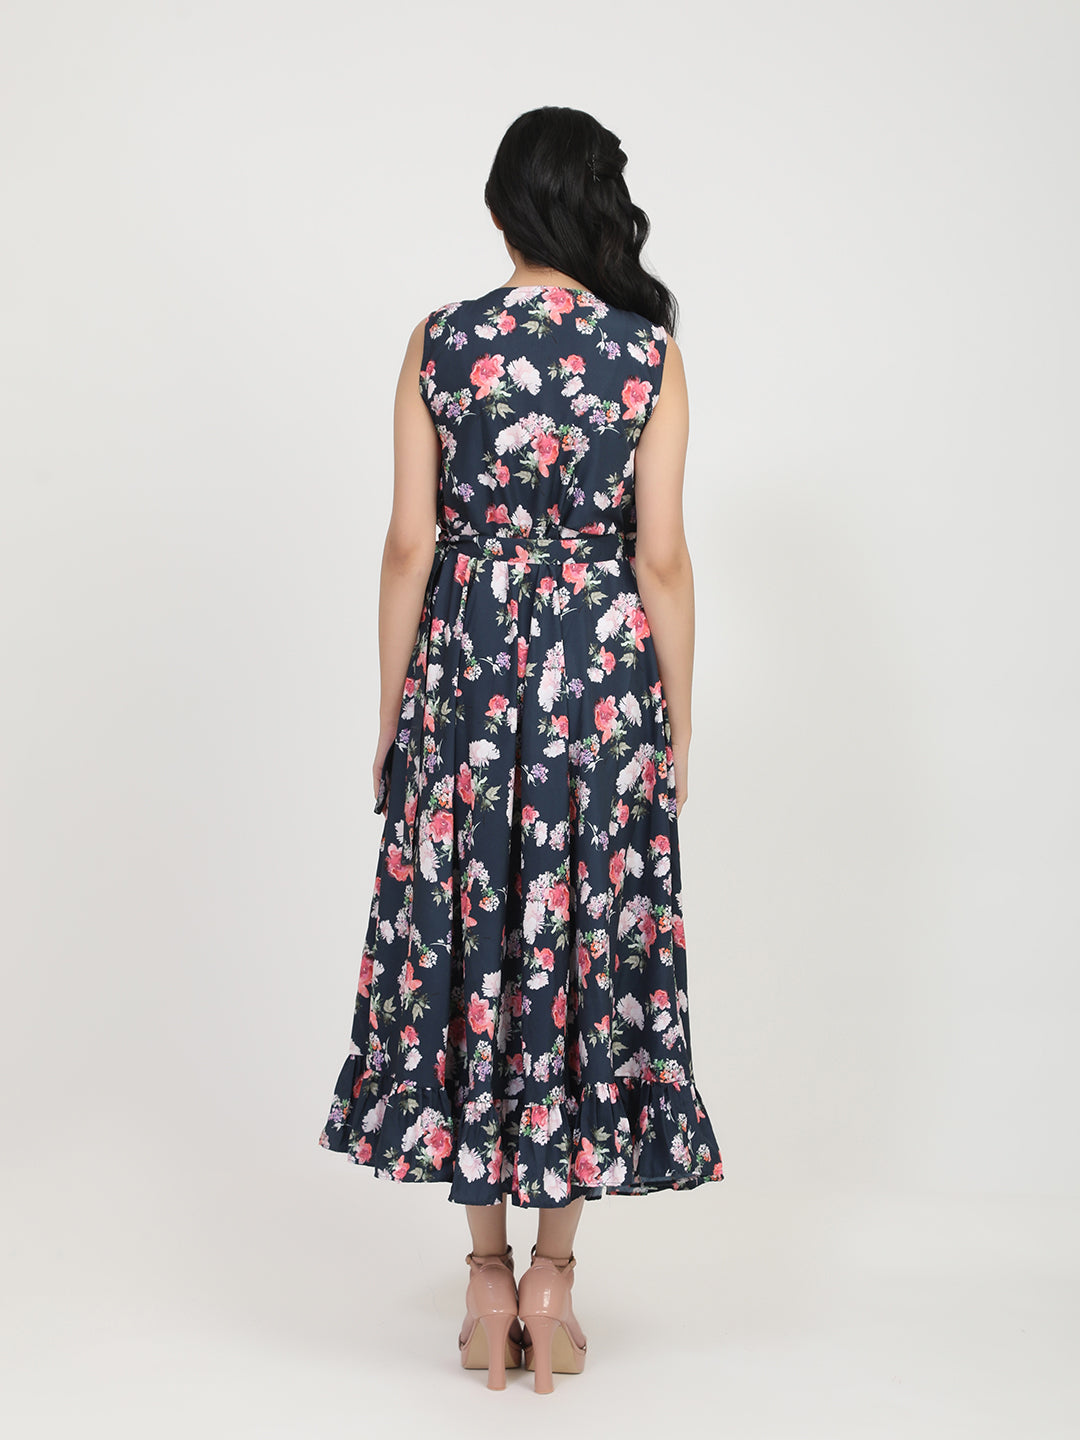 Bhama Couture Women Navy Blue Floral Crepe Maxi Dress